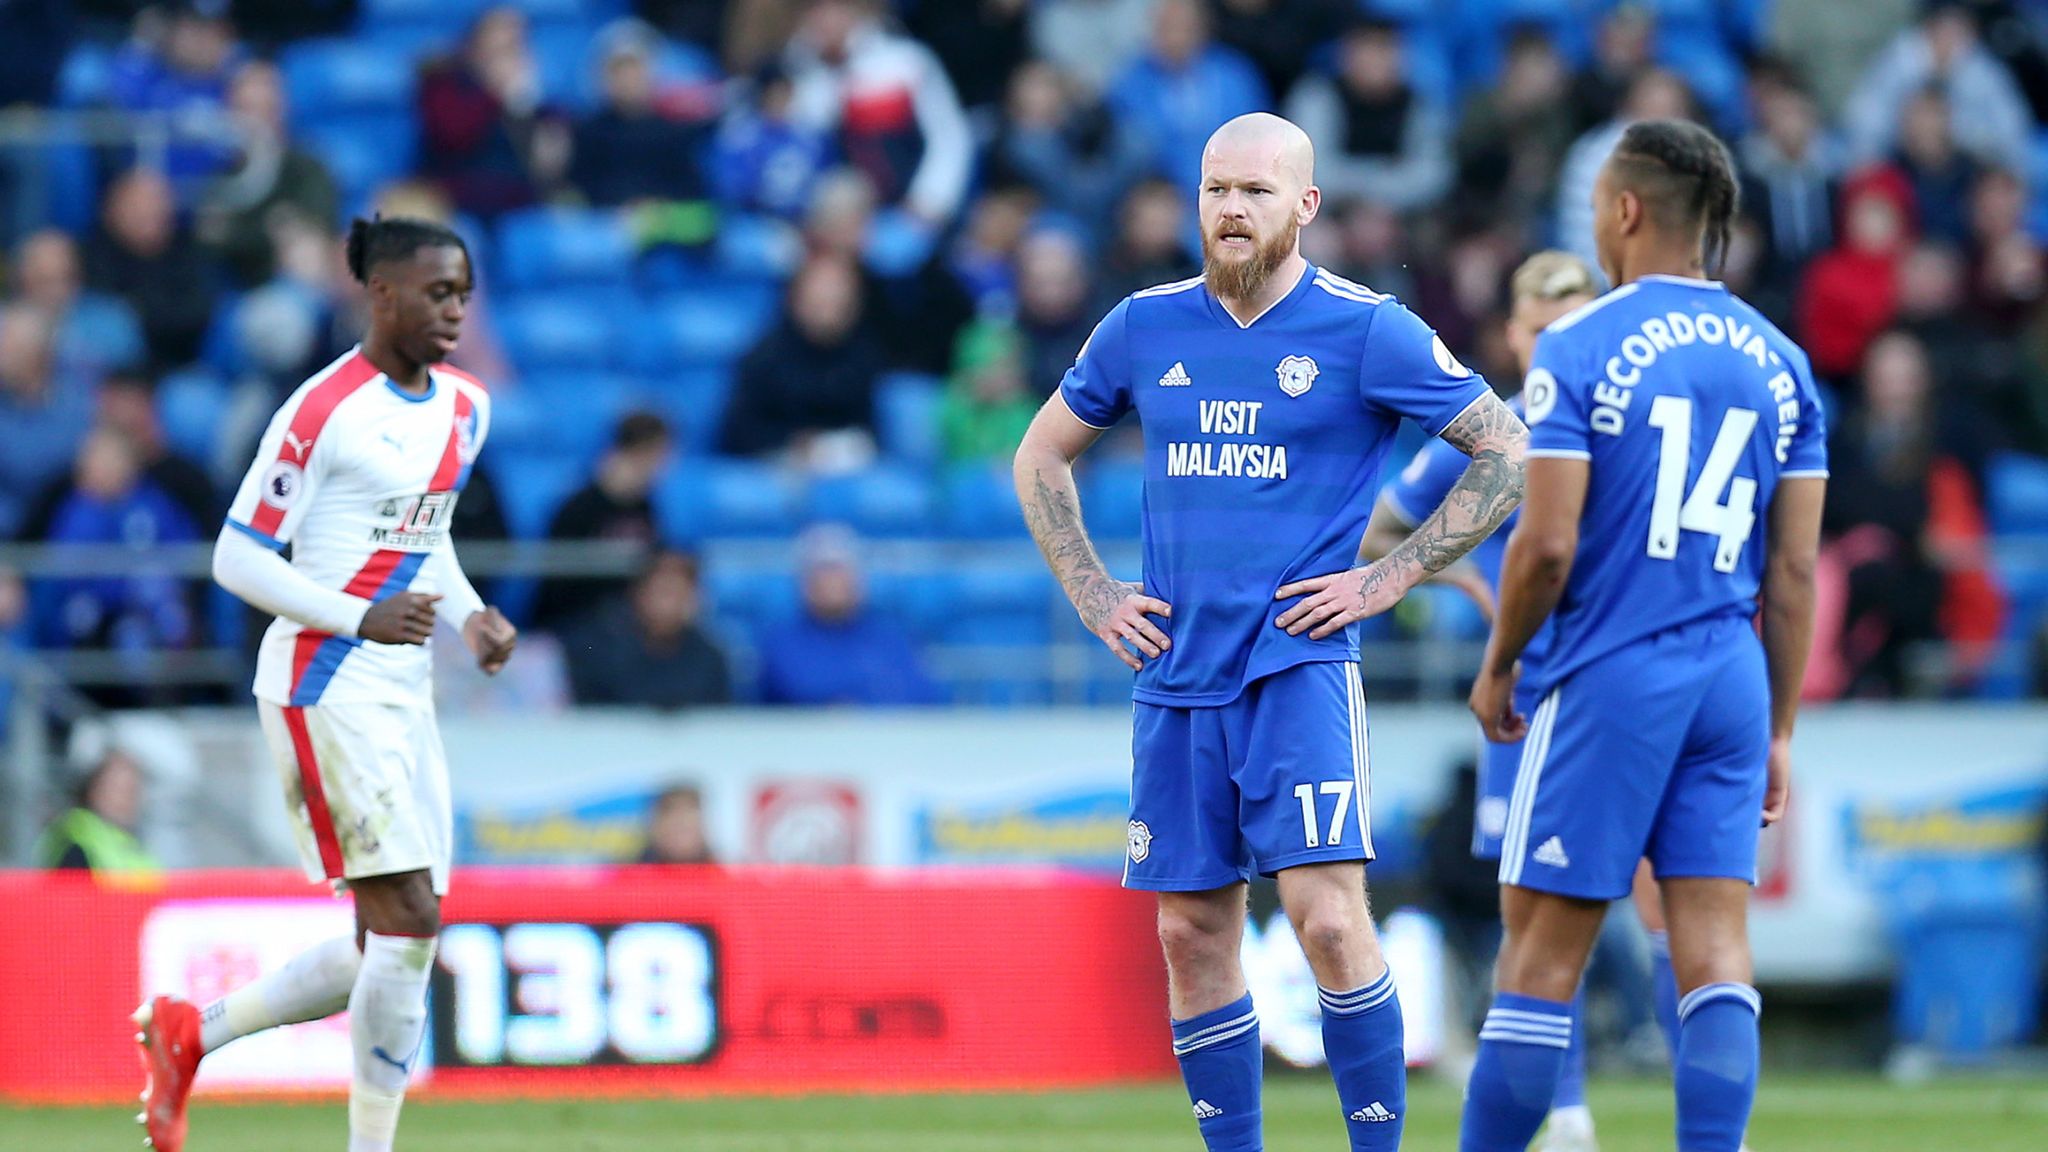 Cardiff City 3-2 Coventry: Bluebirds hold on for win in five-goal